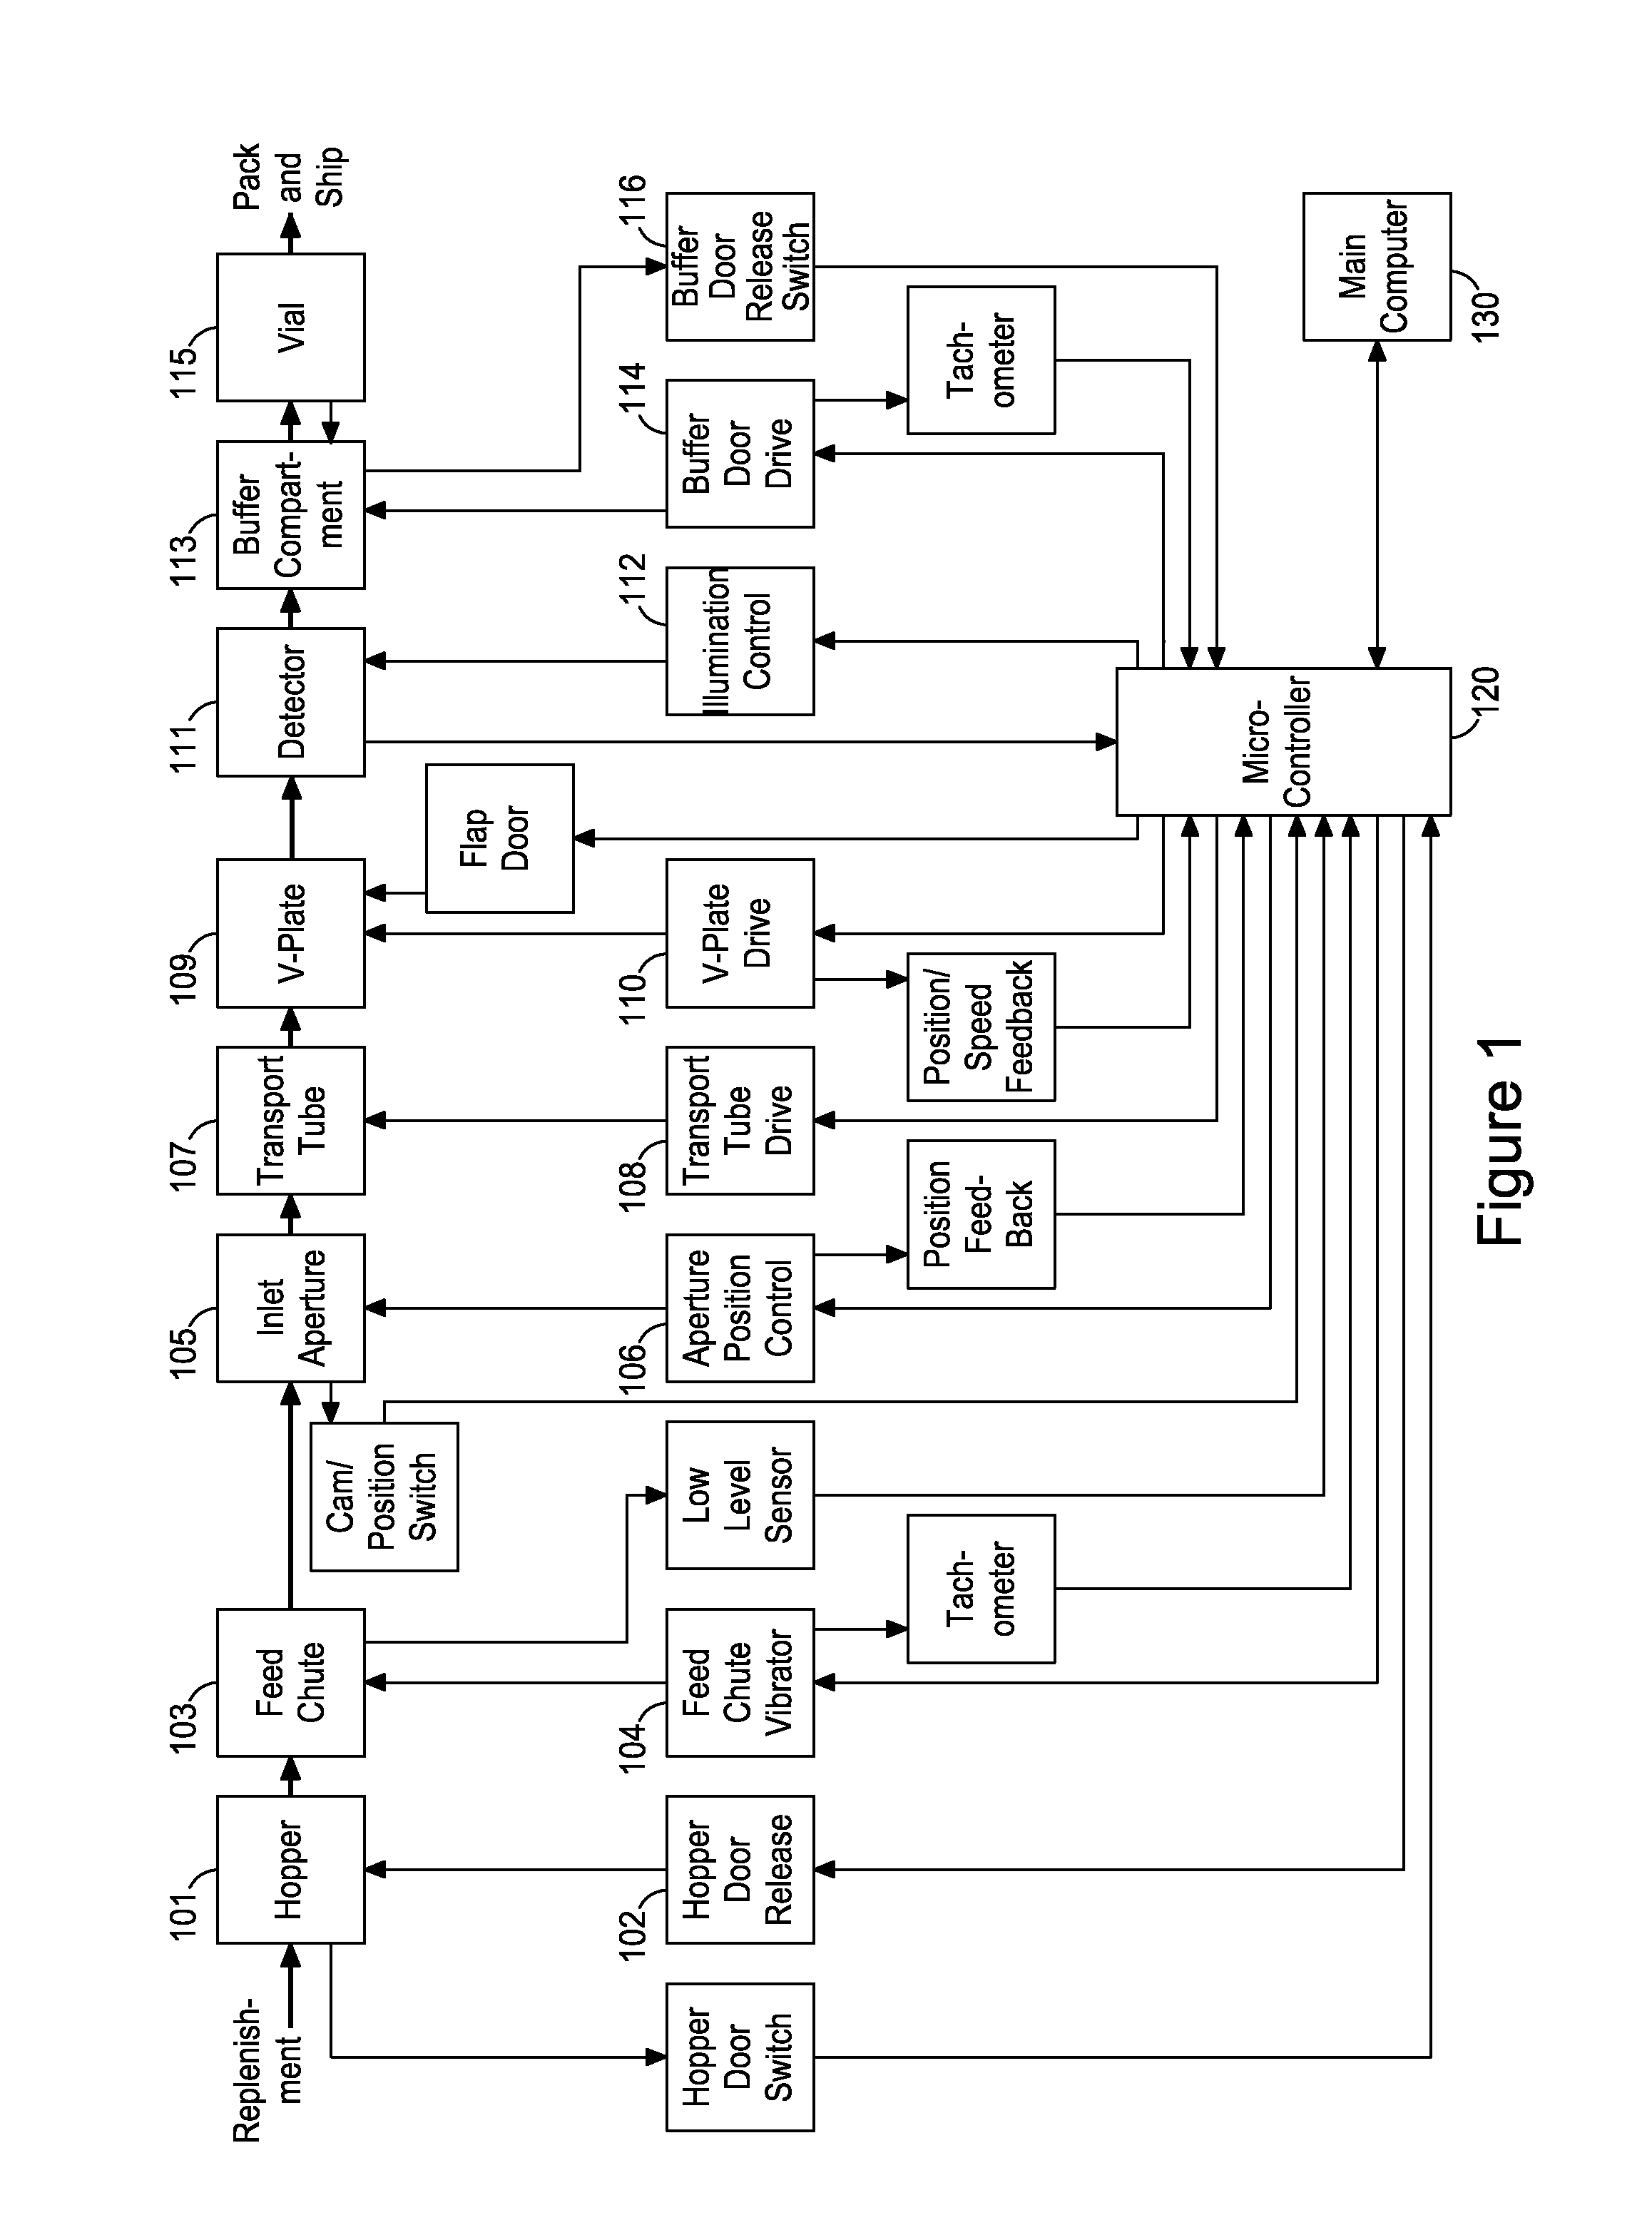 Aperture position control for pill counting and dispensing apparatus